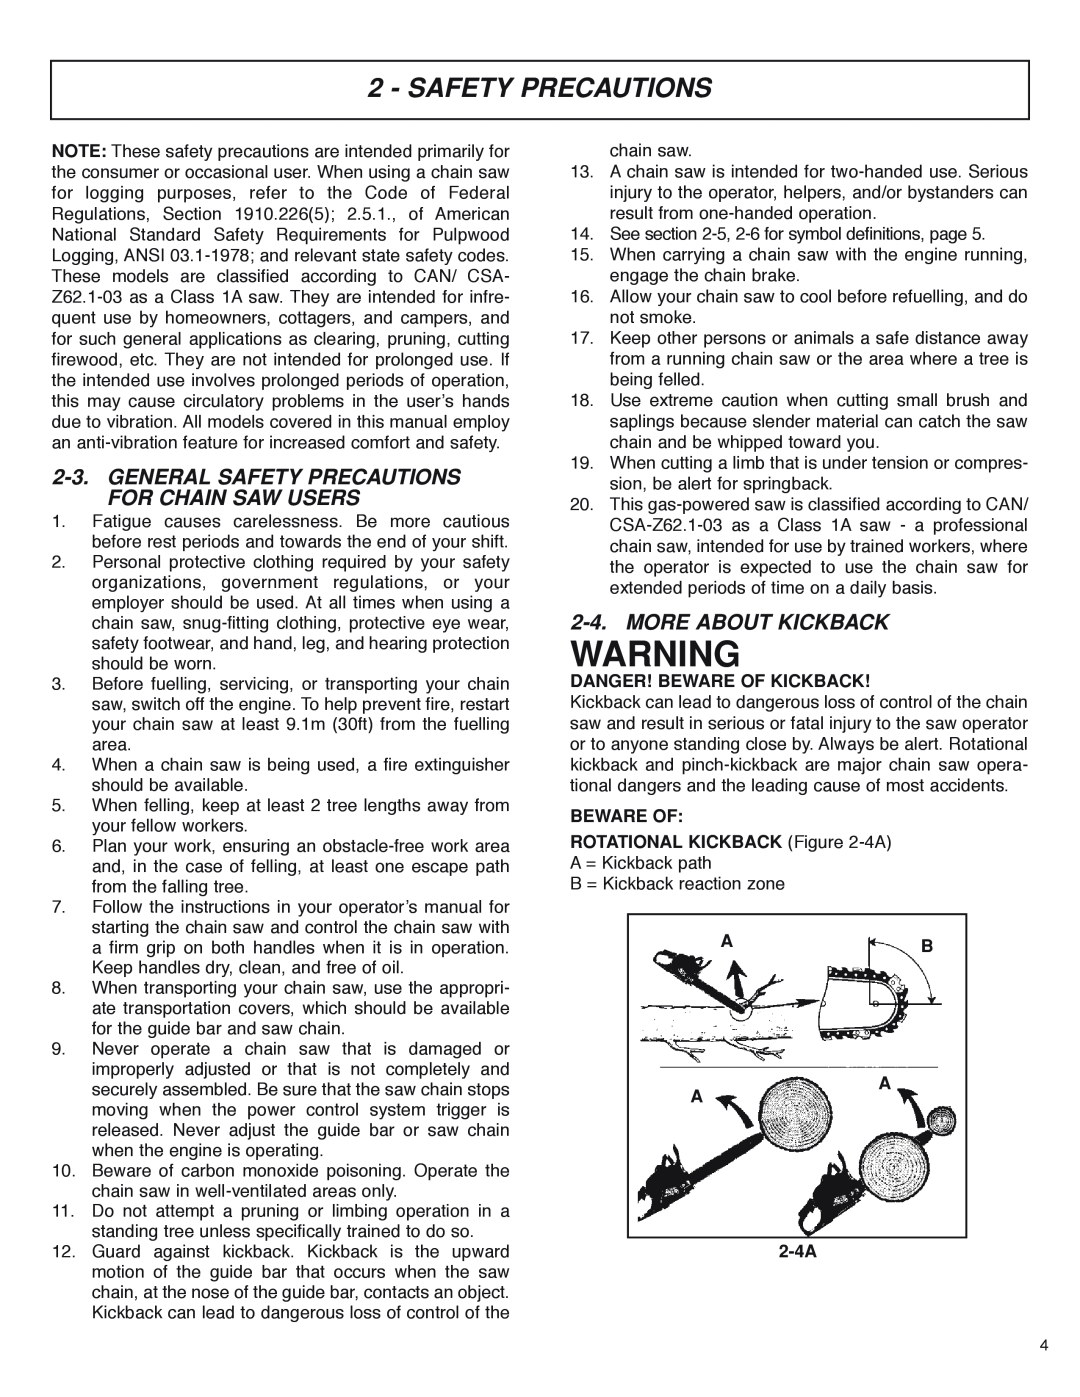 McCulloch MS4016PAVCC, MS4018PAVCC General Safety Precautions For Chain Saw Users, More About Kickback, AB A A 2-4A 